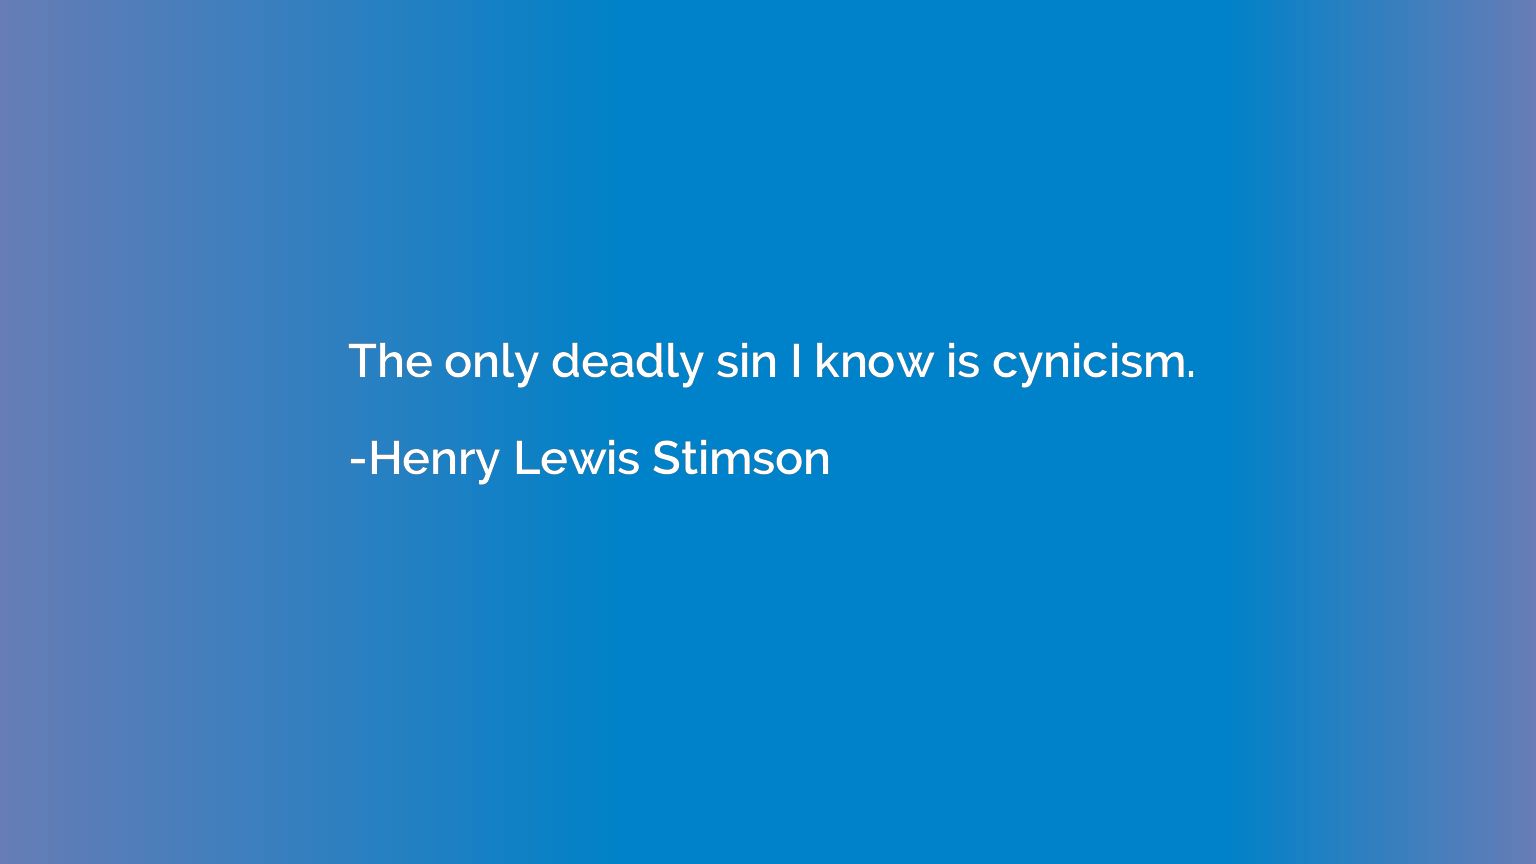 The only deadly sin I know is cynicism.